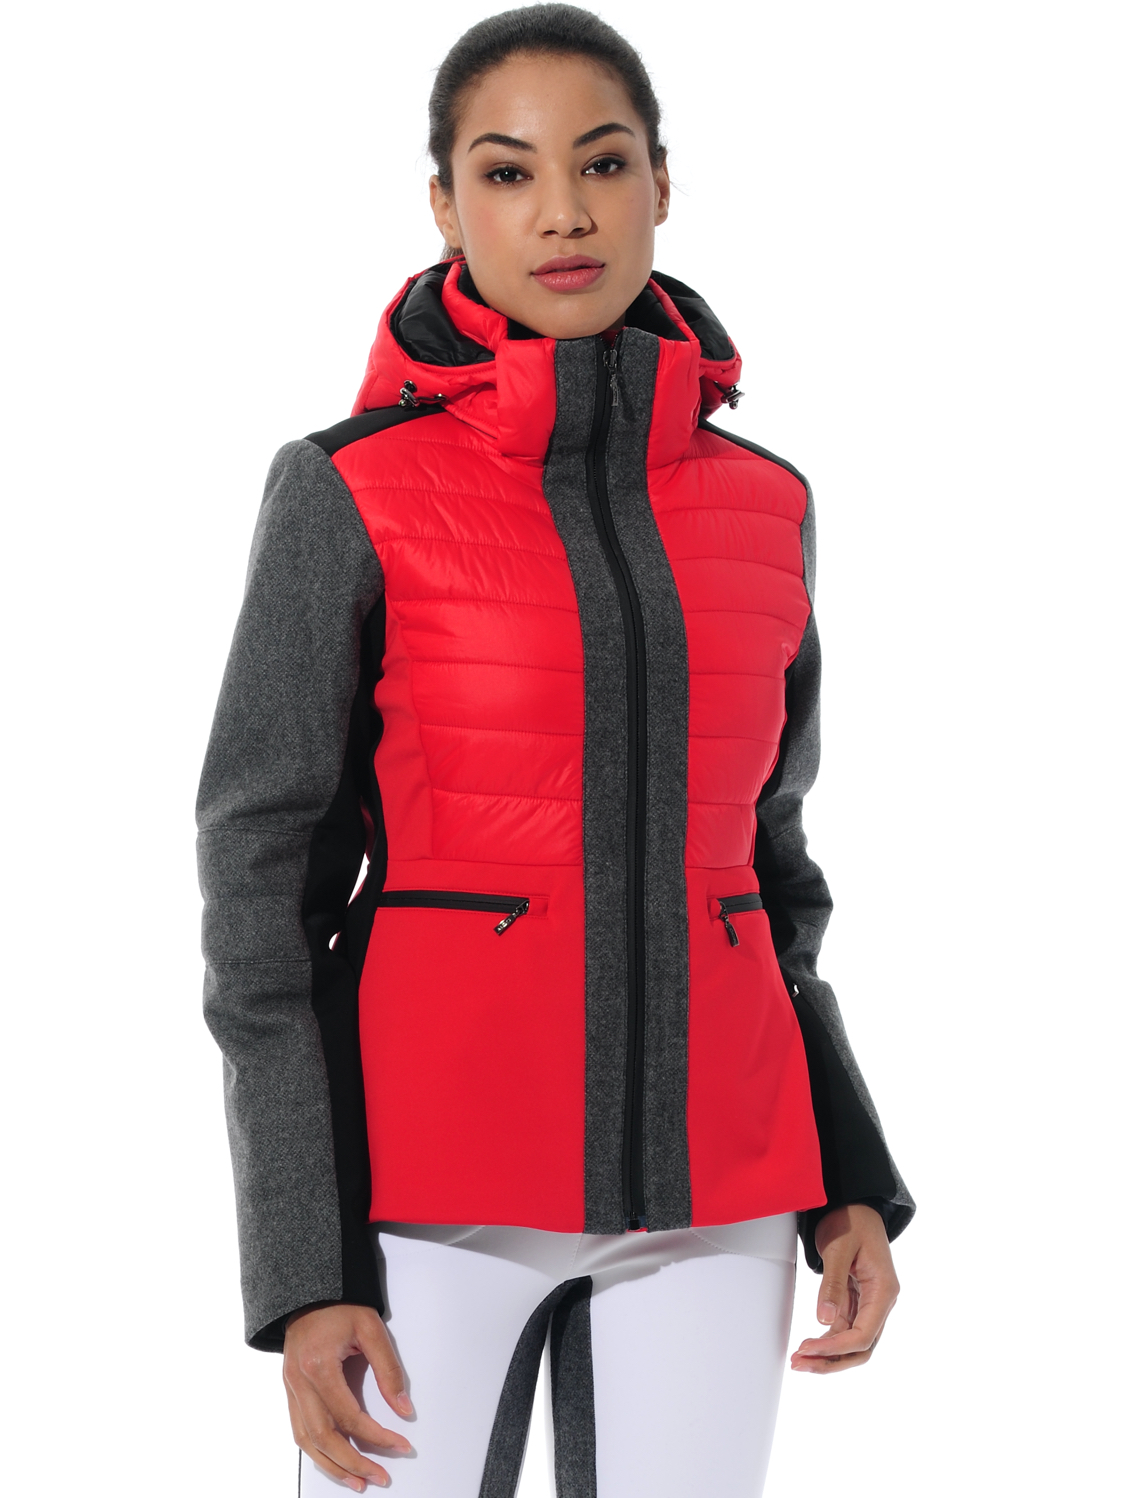 stretch ski jacket with loden details red/grey 